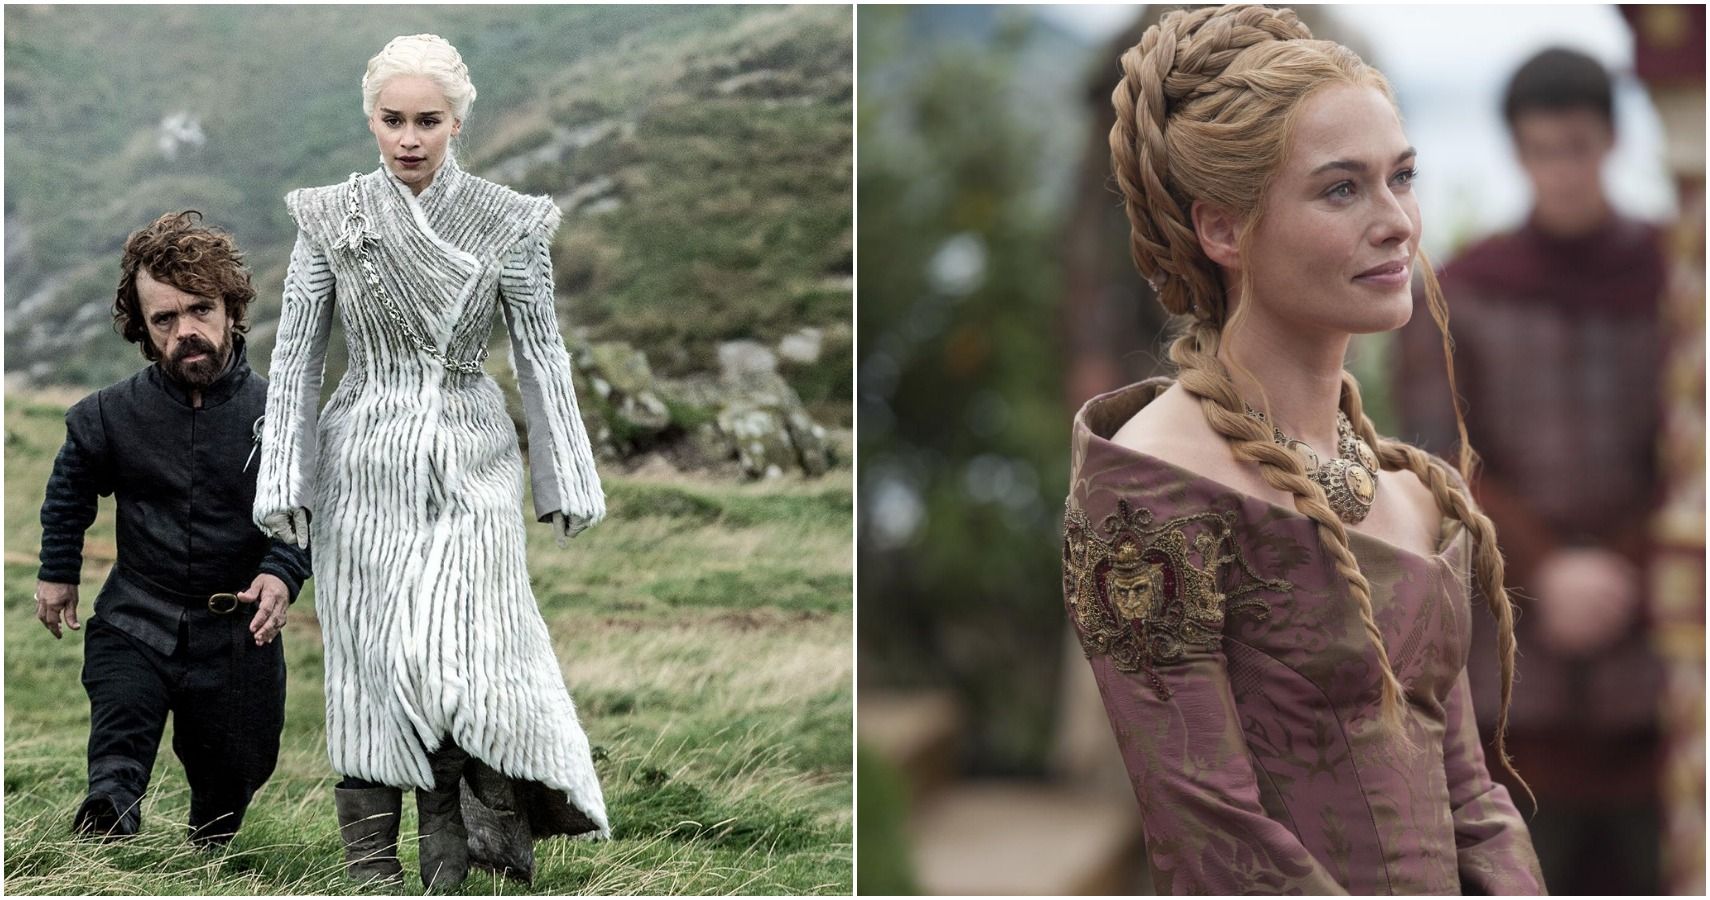 Game Of Thrones 5 Characters Who Would Make The Best Girlfriends (& 5 Who Would Make The Worst)